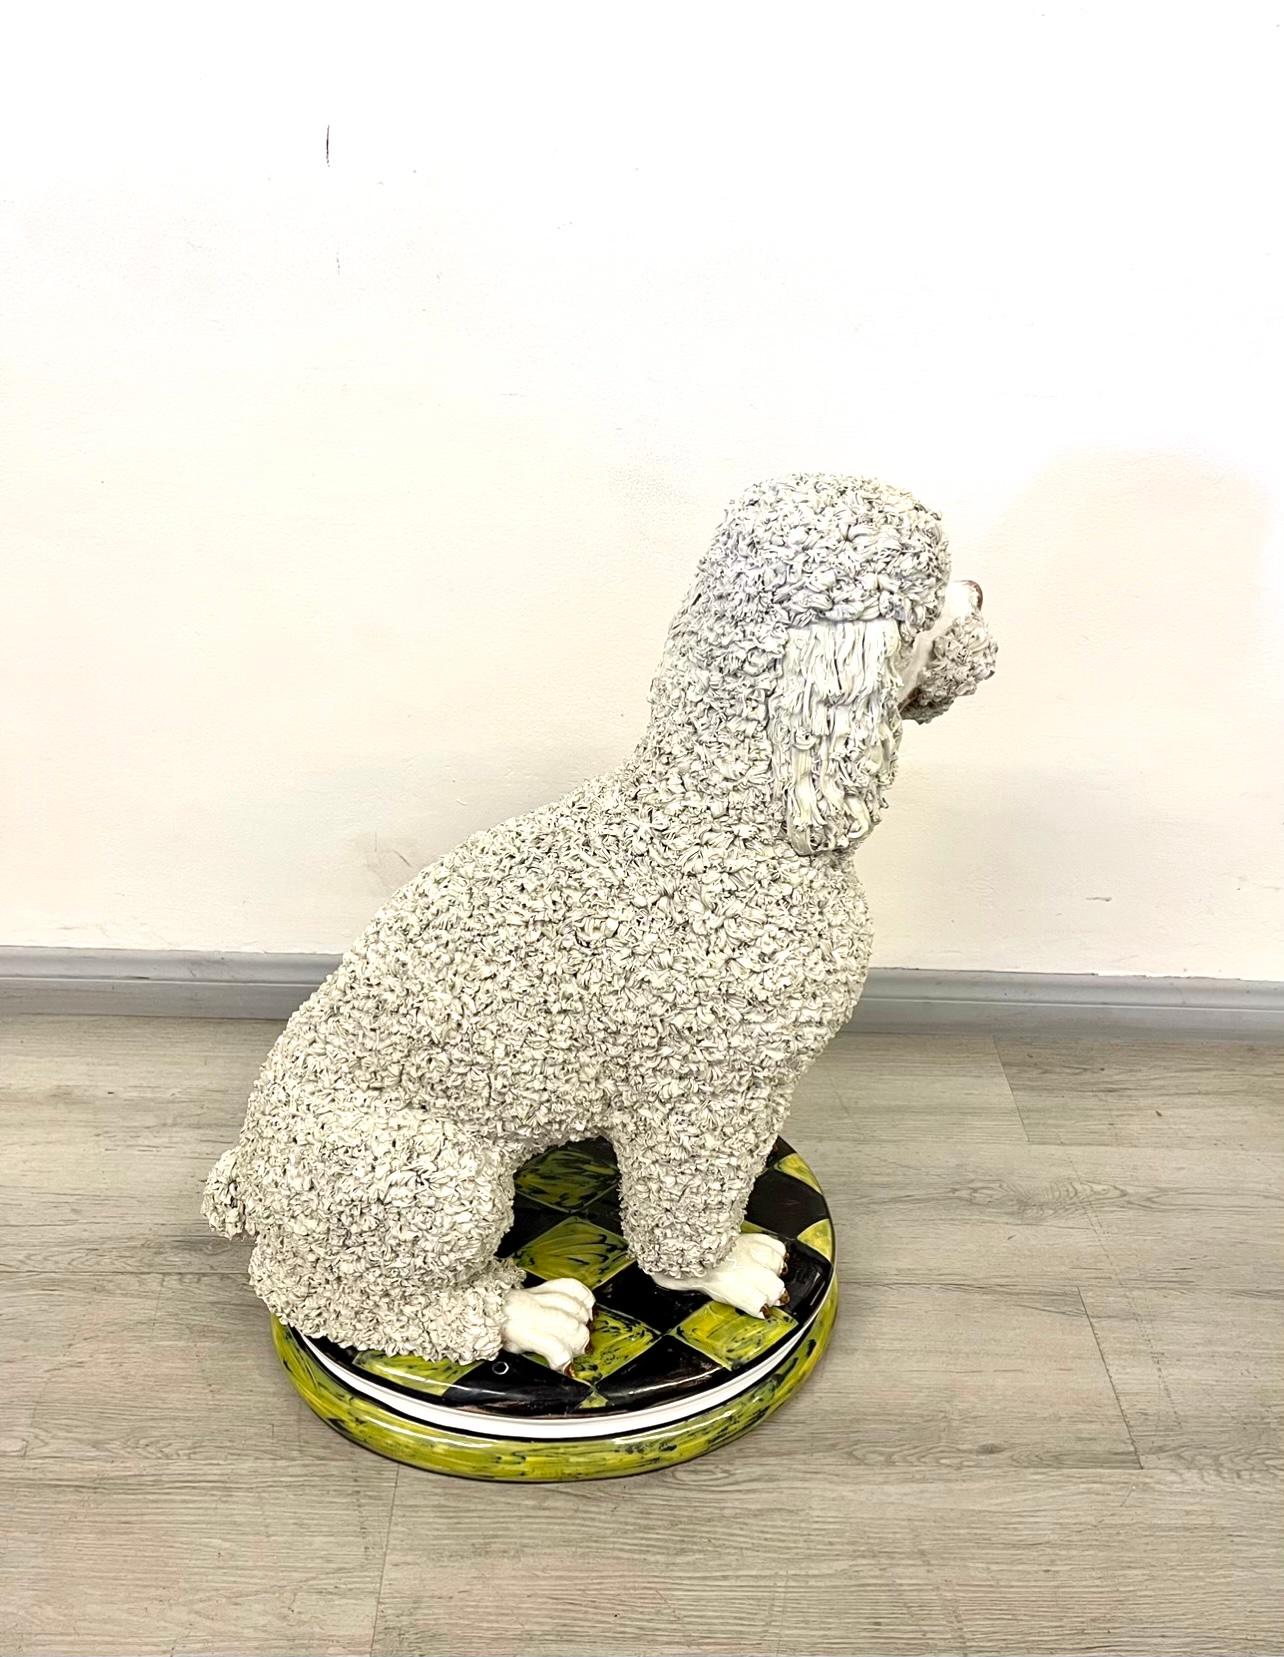 A beautiful Italian ceramic white poodle “Spaghetti” dog sculpture. A very well done sculpture. No cracks or chips. The Italian ceramic stand on a harlequin pattern base painted with a nice green and black color. A wonderful sculpture to decorate